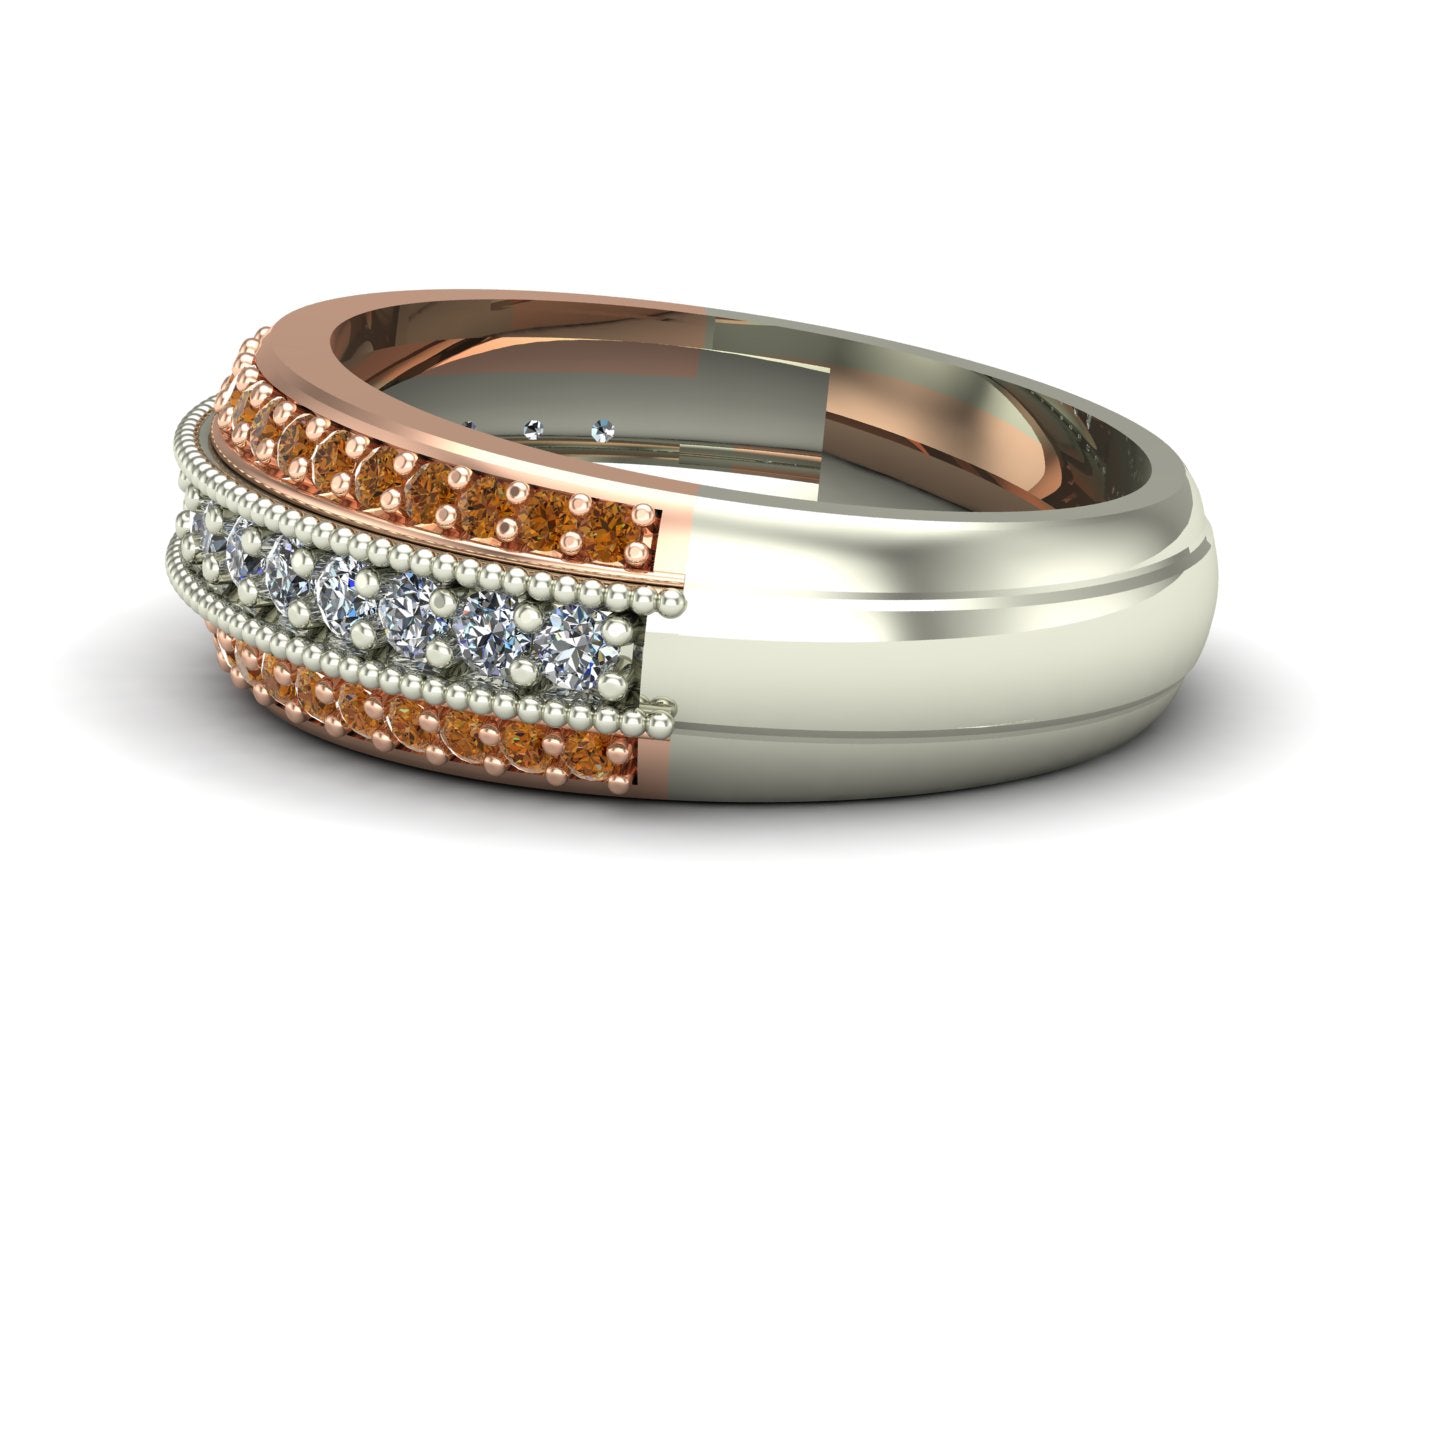 White and cognac diamond band in 14k white and rose gold